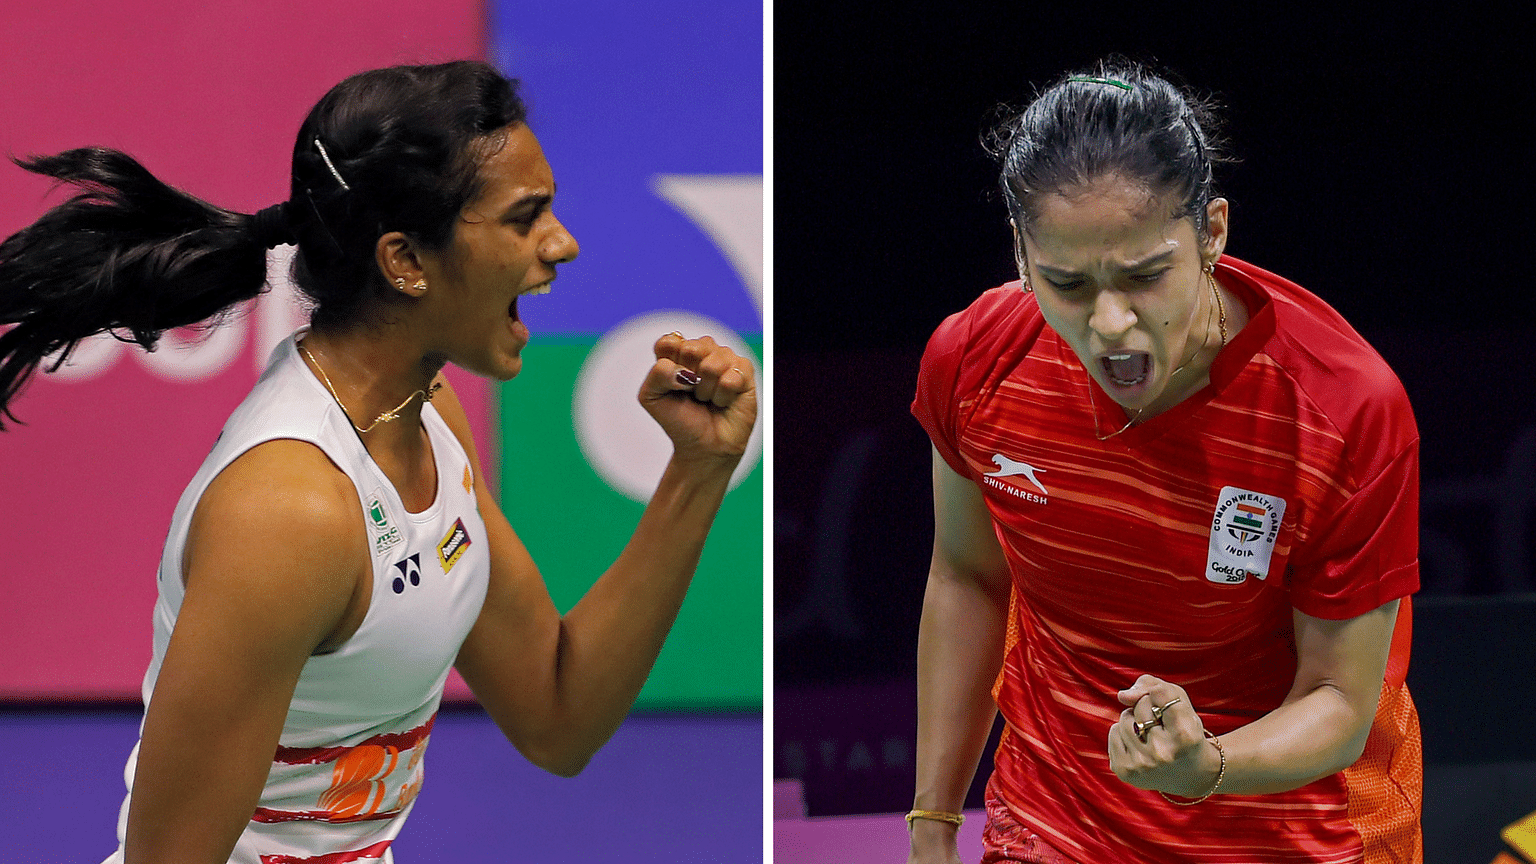 PV Sindhu will face Saina Nehwal for the gold medal on Sunday.